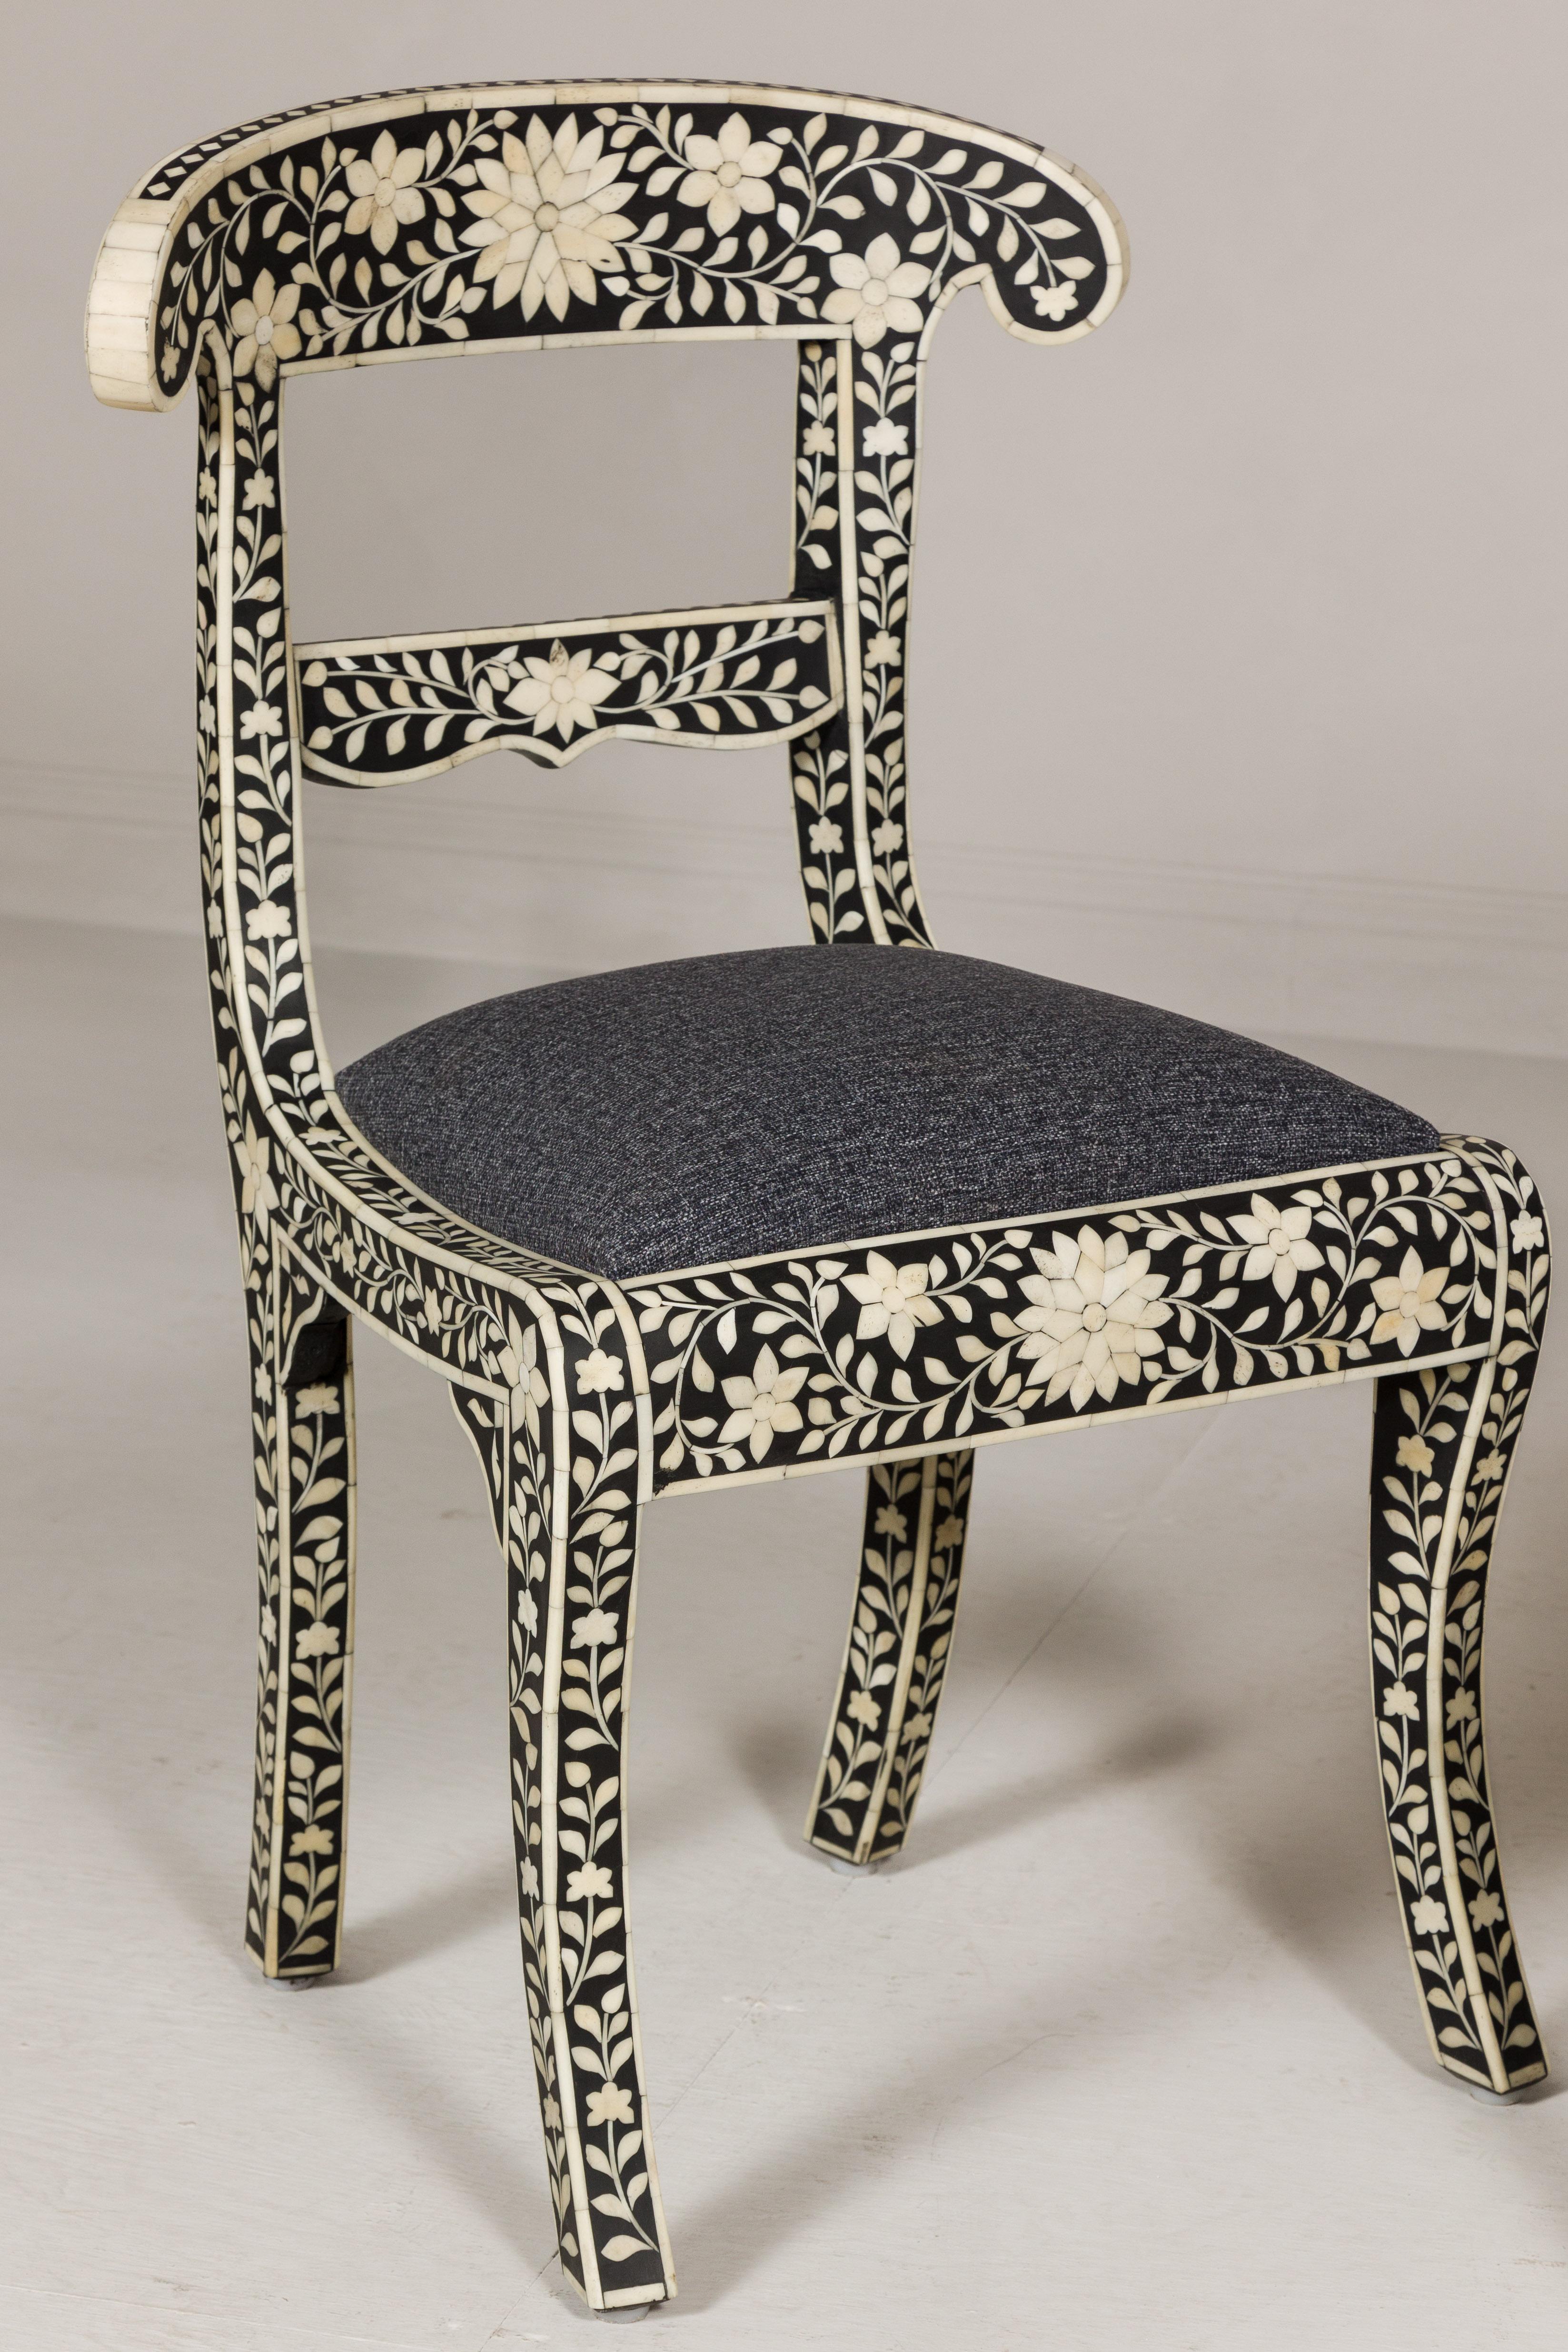 Anglo-Indian Style Ebonized Side Chairs with Floral Themed Bone Inlay, a Pair In Excellent Condition For Sale In Yonkers, NY